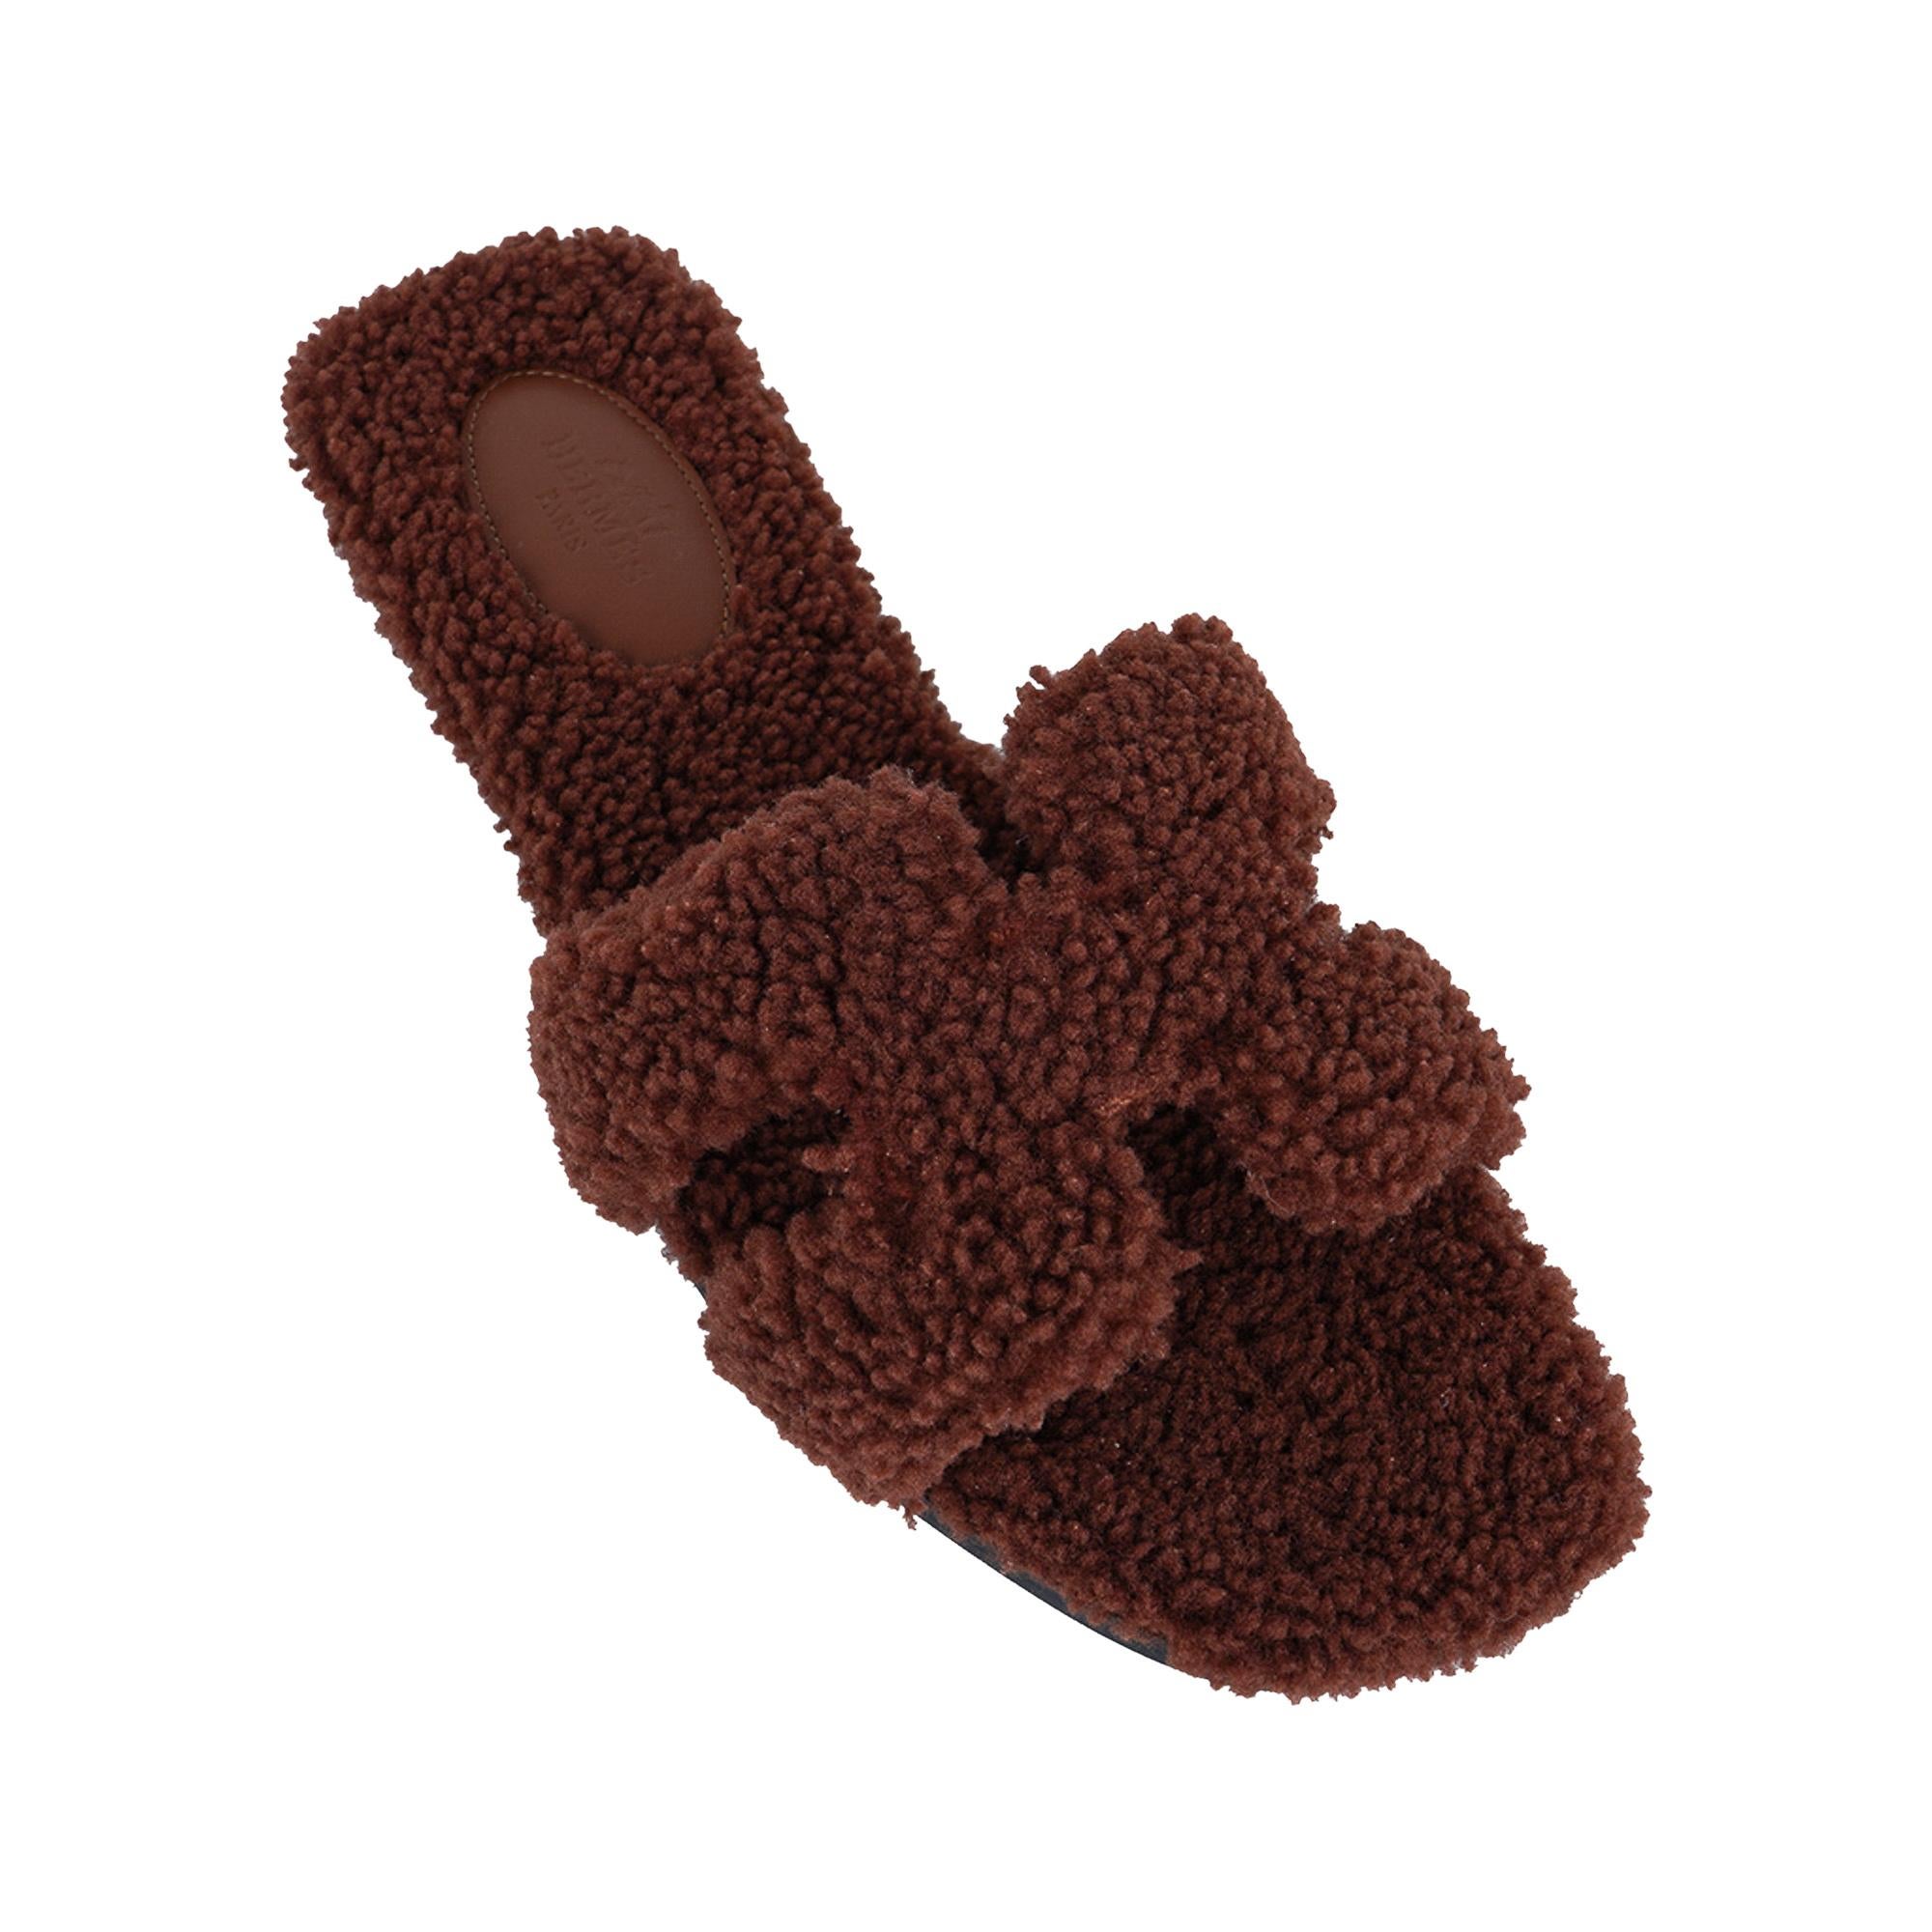 Mightychic offers a pair of Hermes Oran Shearling limited edition flat sandal slide featured in Brun (Brown).
This beautiful arm Brown Hermes Oran shearling sandal is foot flirting perfection!
Embossed Hermes Paris leather insole.
Wood heel.
Comes